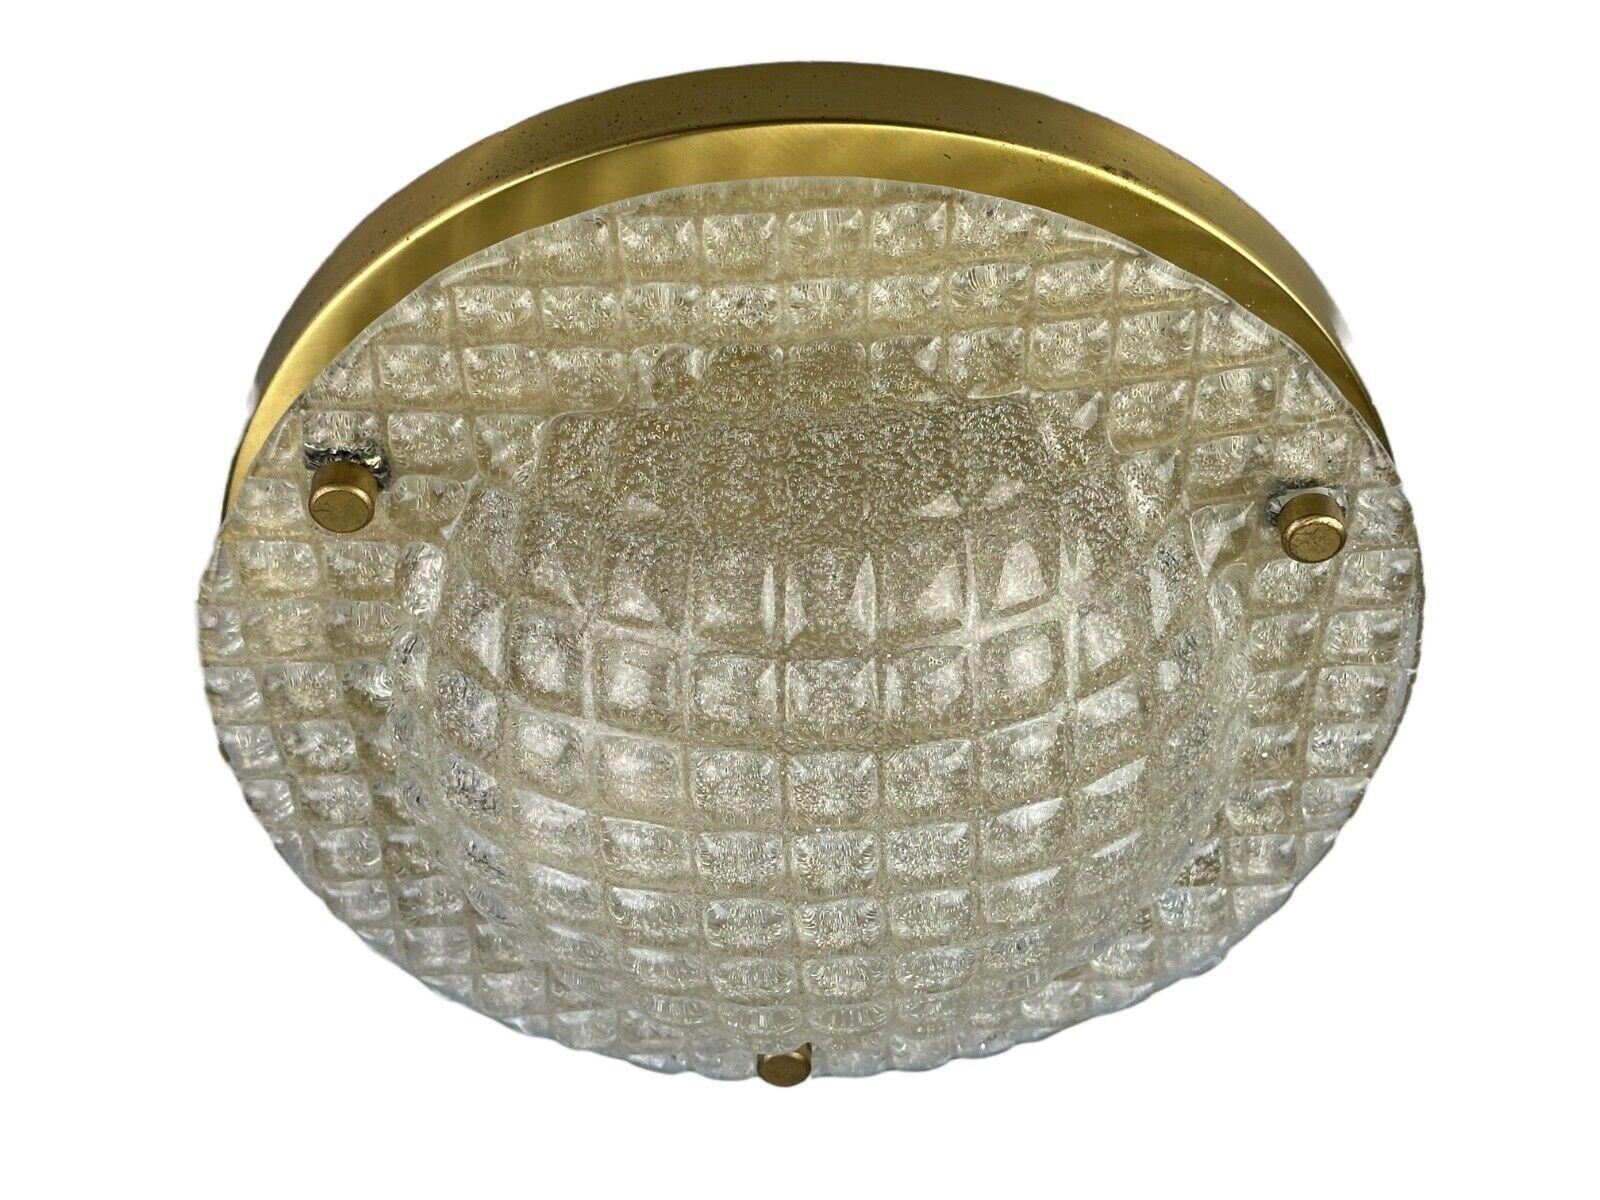 60s 70s Plafoniere ceiling lamp by Fischer Leuchten Germany Space Age

Object: Plafoniere

Manufacturer: Fischer Leuchten

Condition: good

Age: around 1960-1970

Dimensions:

Diameter = 30cm
Height = 12cm

Material: Glass & Metal

Other notes:

E27